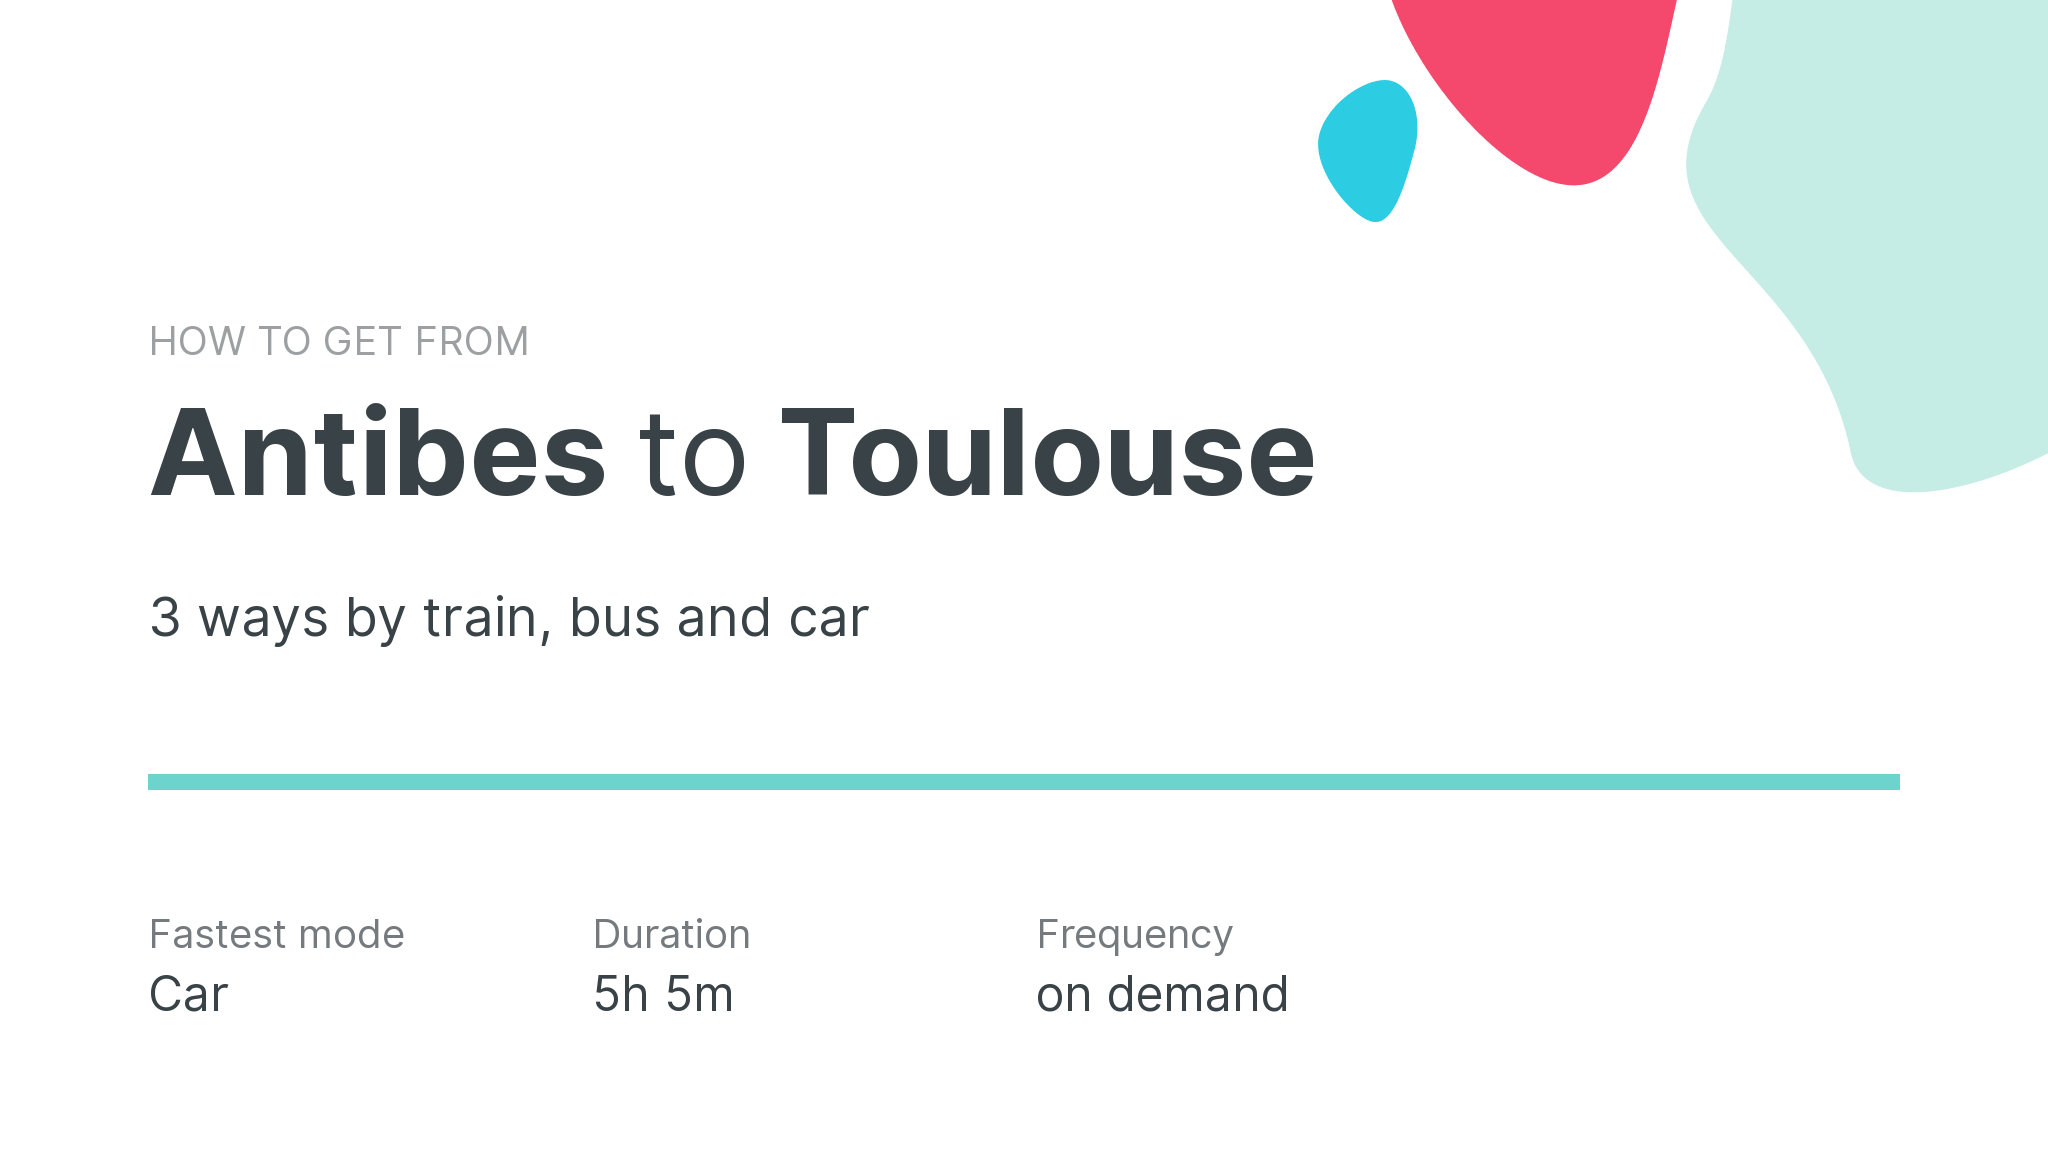 How do I get from Antibes to Toulouse